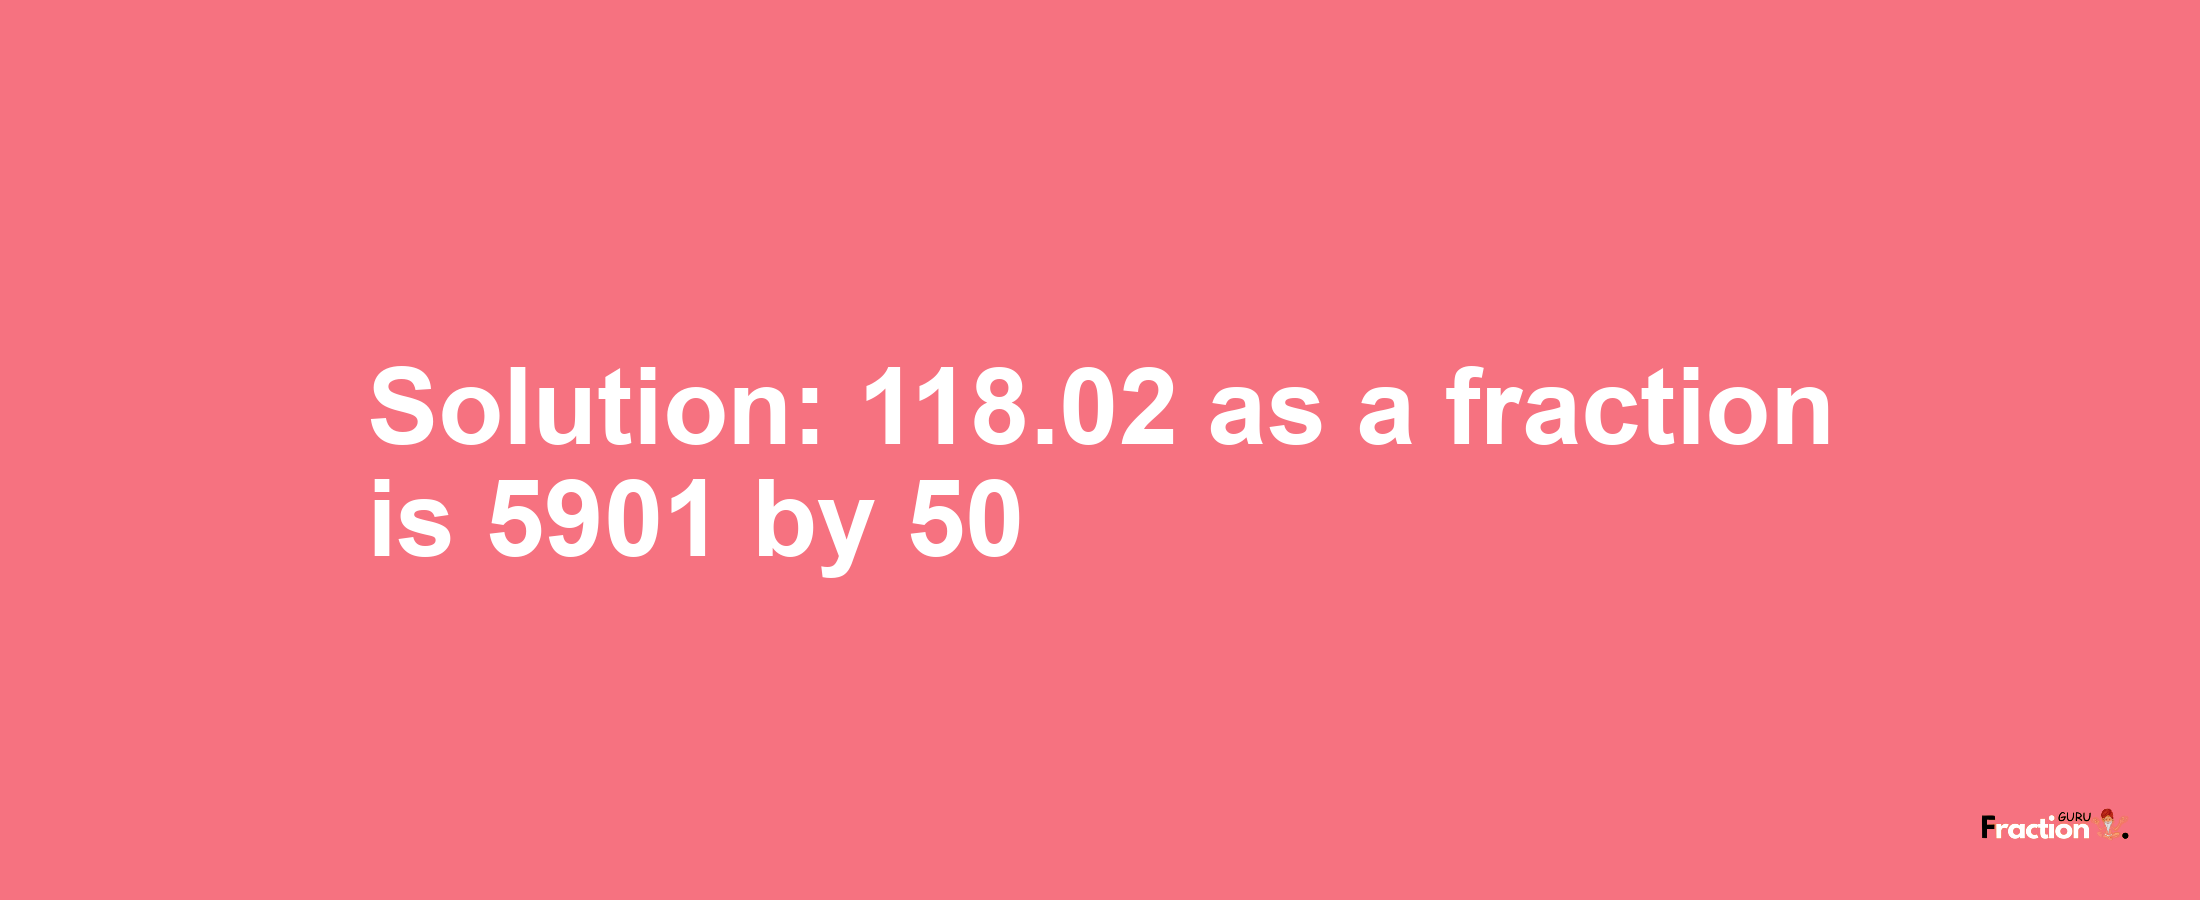 Solution:118.02 as a fraction is 5901/50